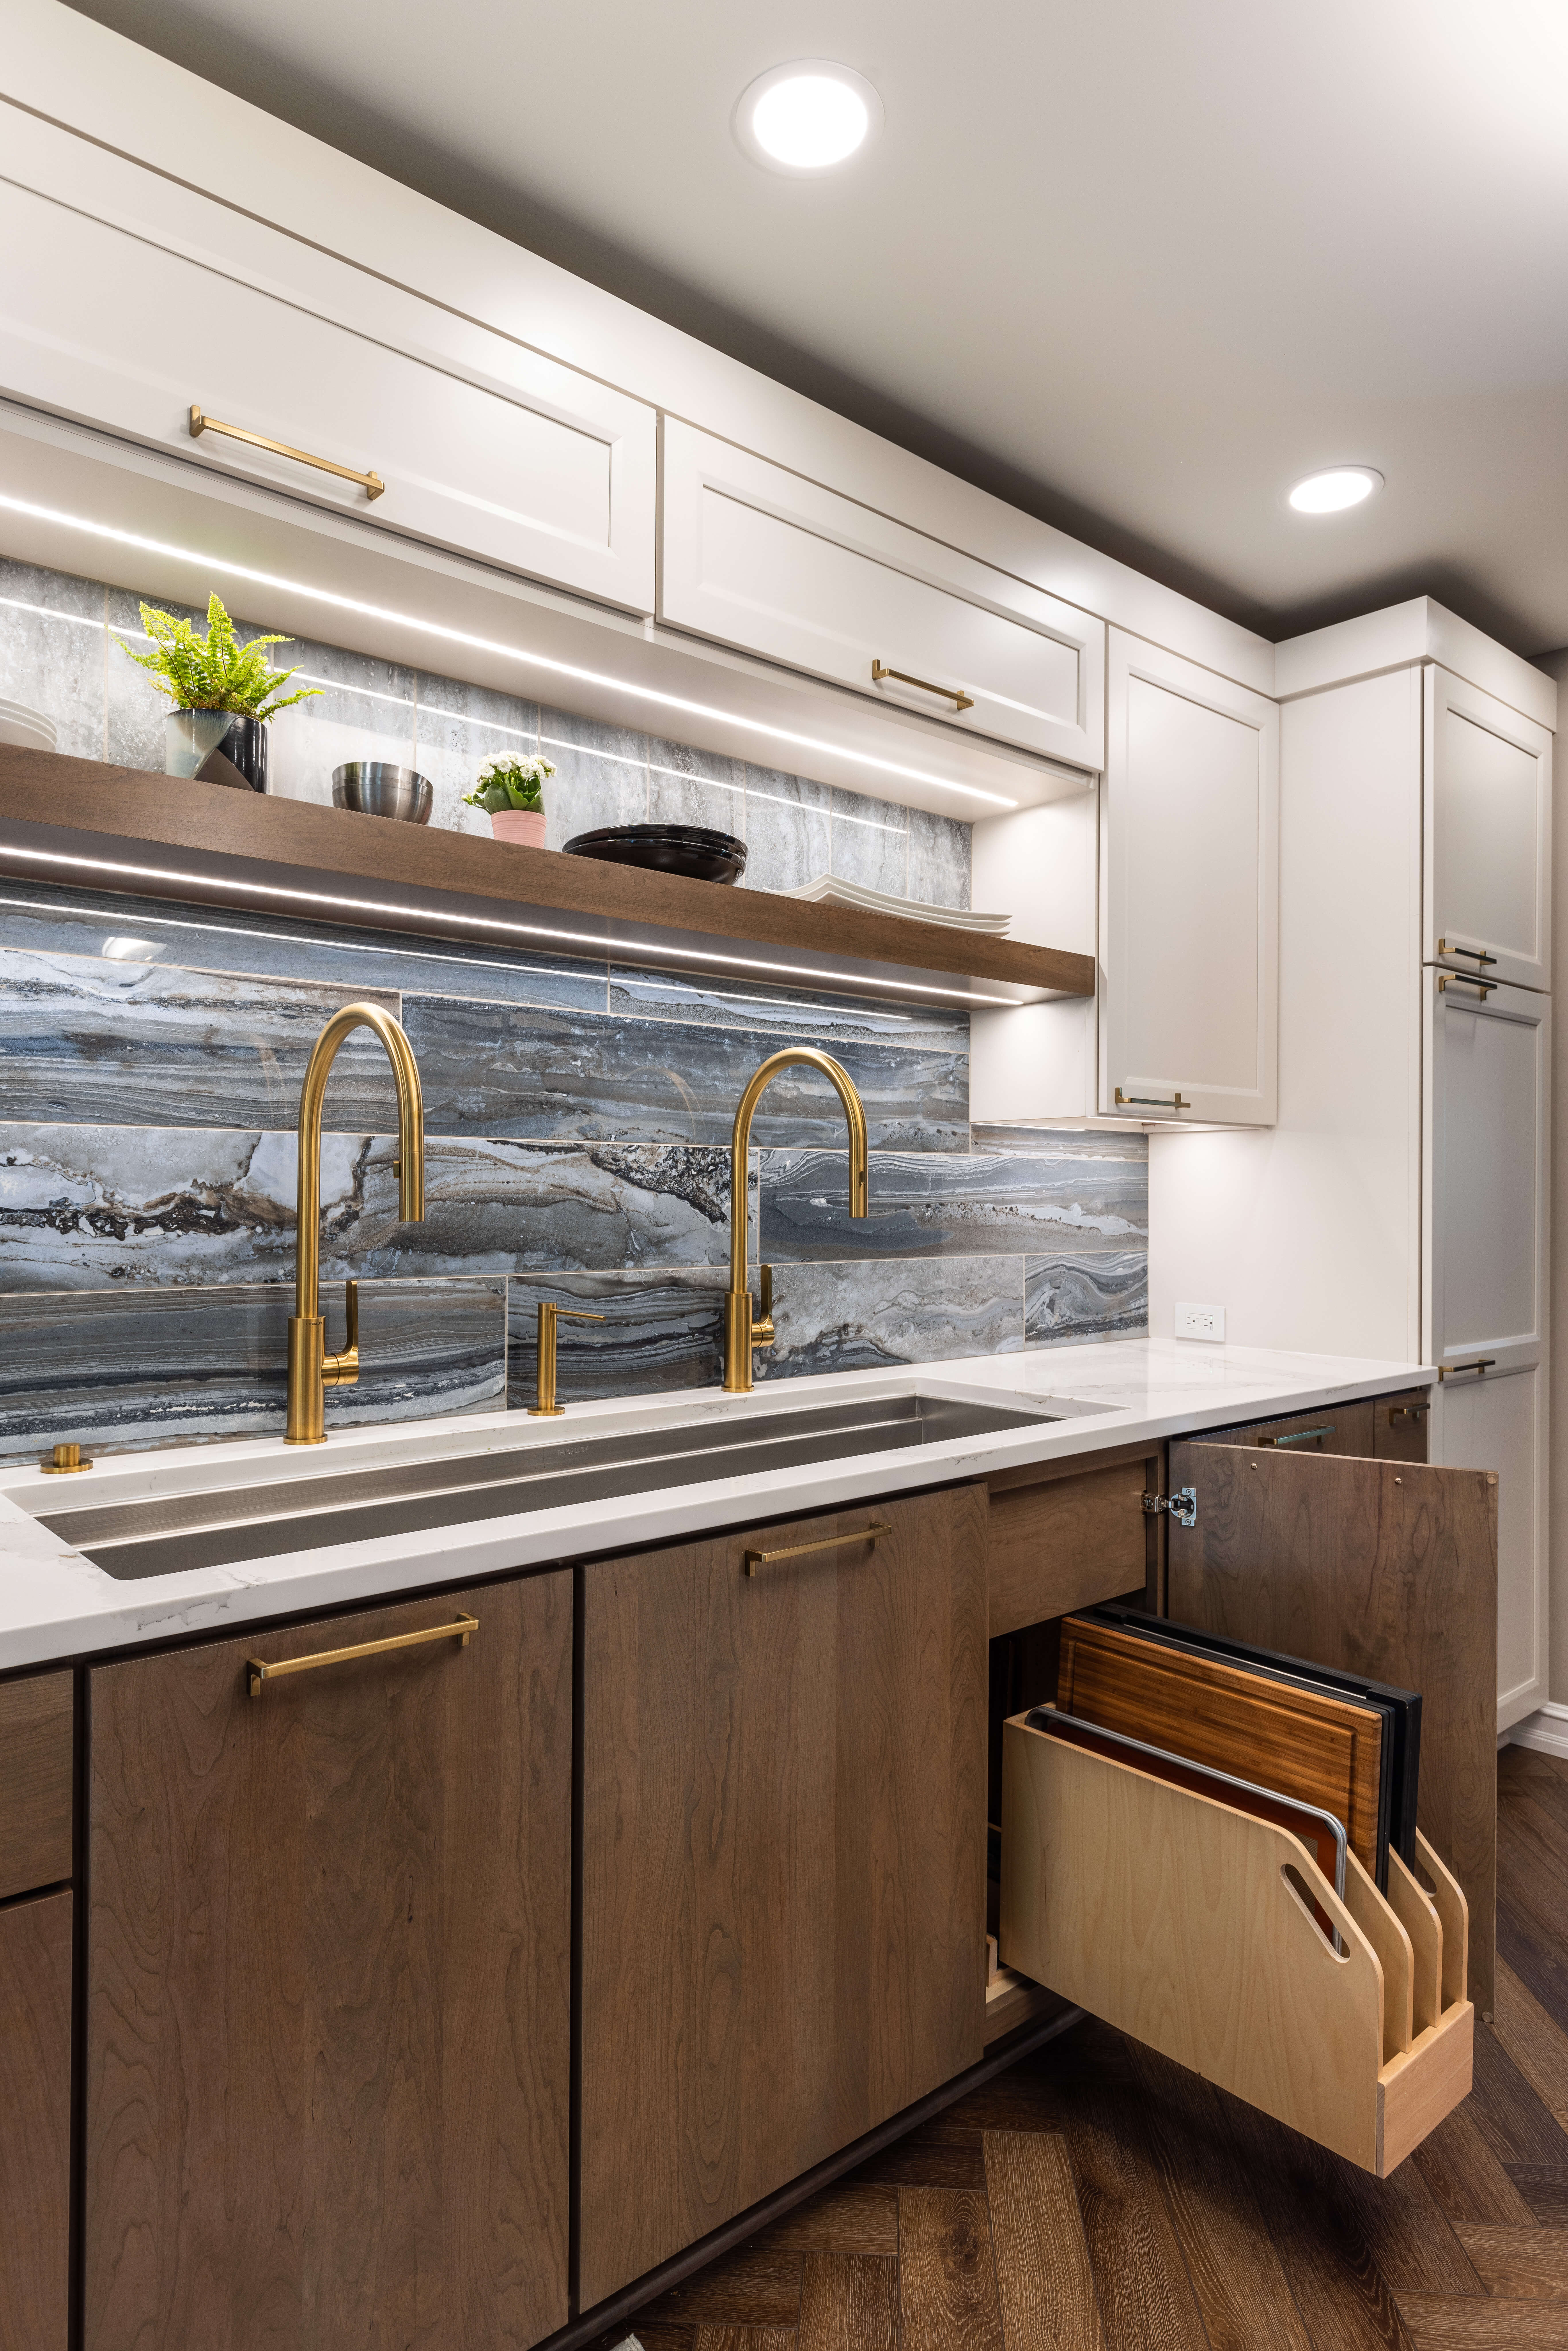 A two-toned kitchen with a medium stain and an off-white paint for the cabinets features a pull-out storage accessory for tray storage.